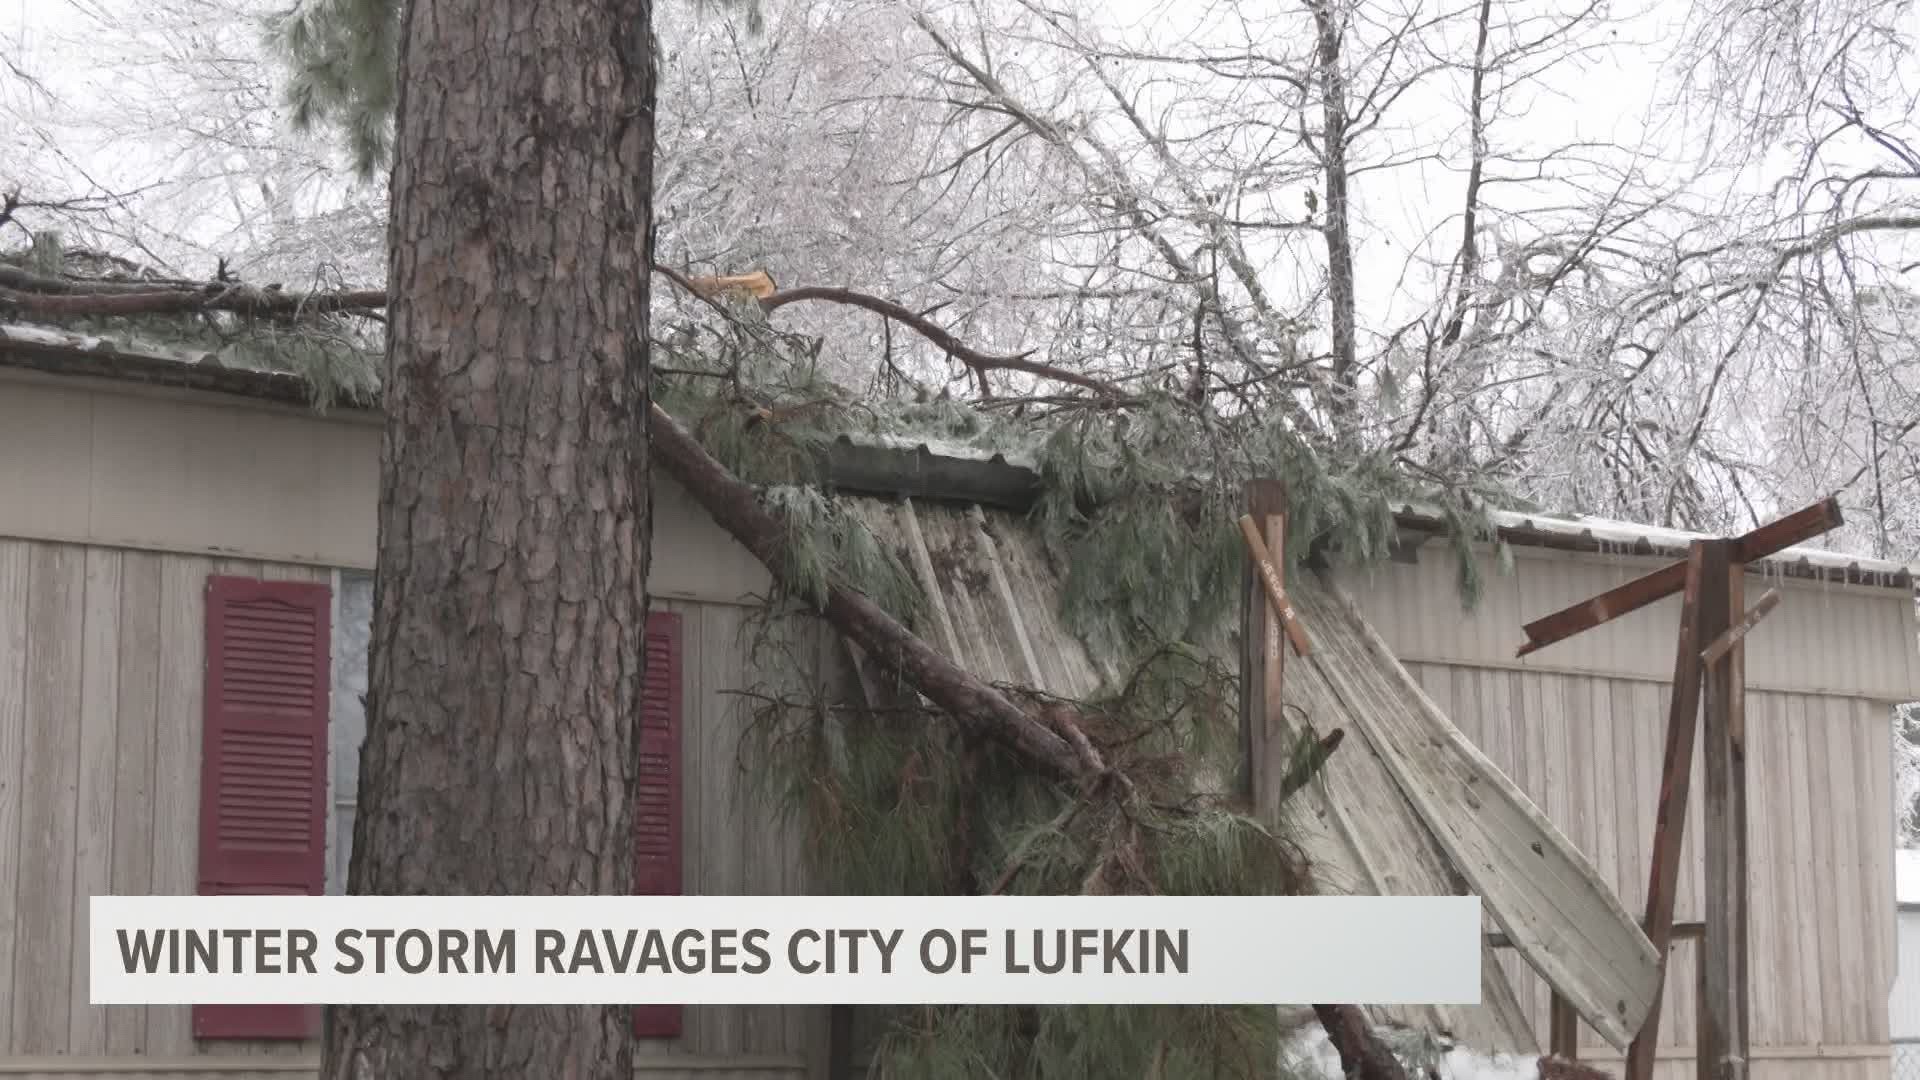 The City of Lufkin is trying to salvage the damage from an unforgiving storm.